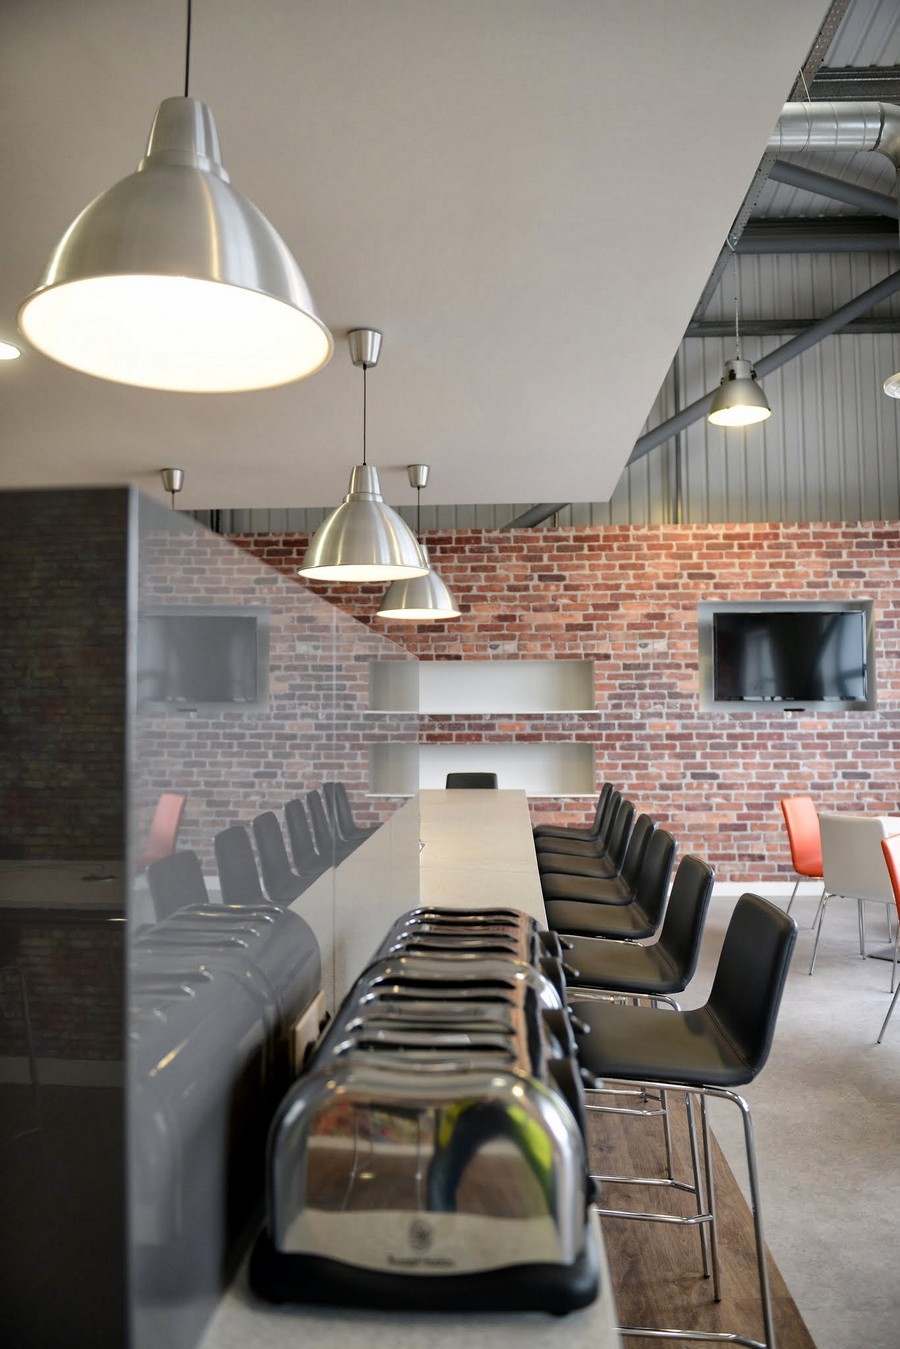 Room Space Nsg Fascinating Room Space Design Of NSG Modern Offices With Several Black Colored Stools Which Has Silver Stainless Feet Kitchens Elegant And Modern Dining Room Sets With Wonderful Brick Walls